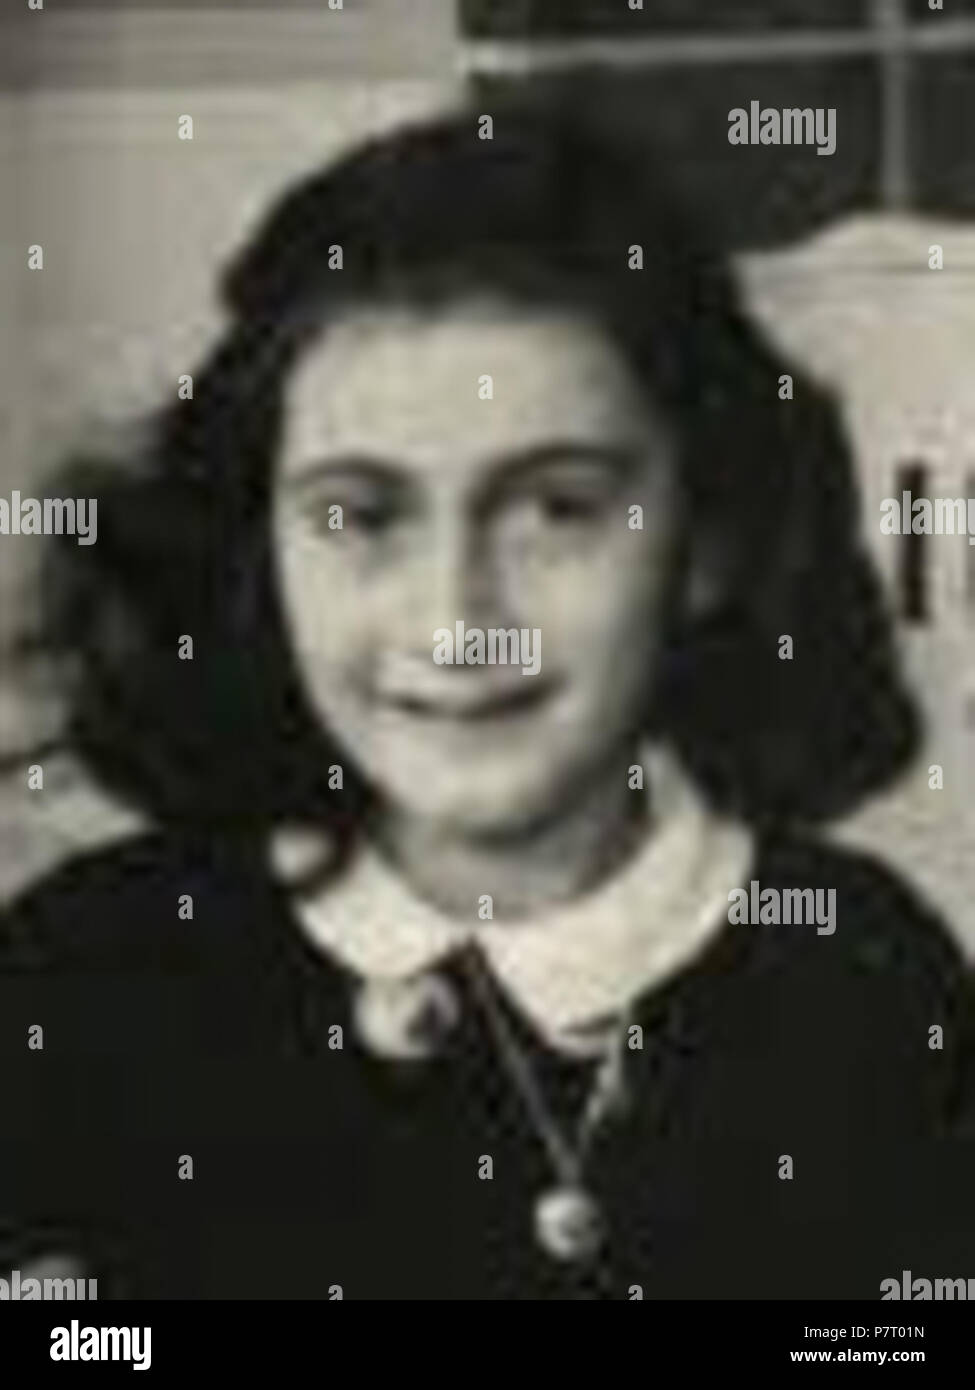 English: Anne Frank in 1940, while at 6. Montessori school, Niersstrraat 41-43, Amsterdam (the Netherlands). Cropped version for using in collages etc. 1940 23 AnneFrankSchoolPhoto cropped Stock Photo